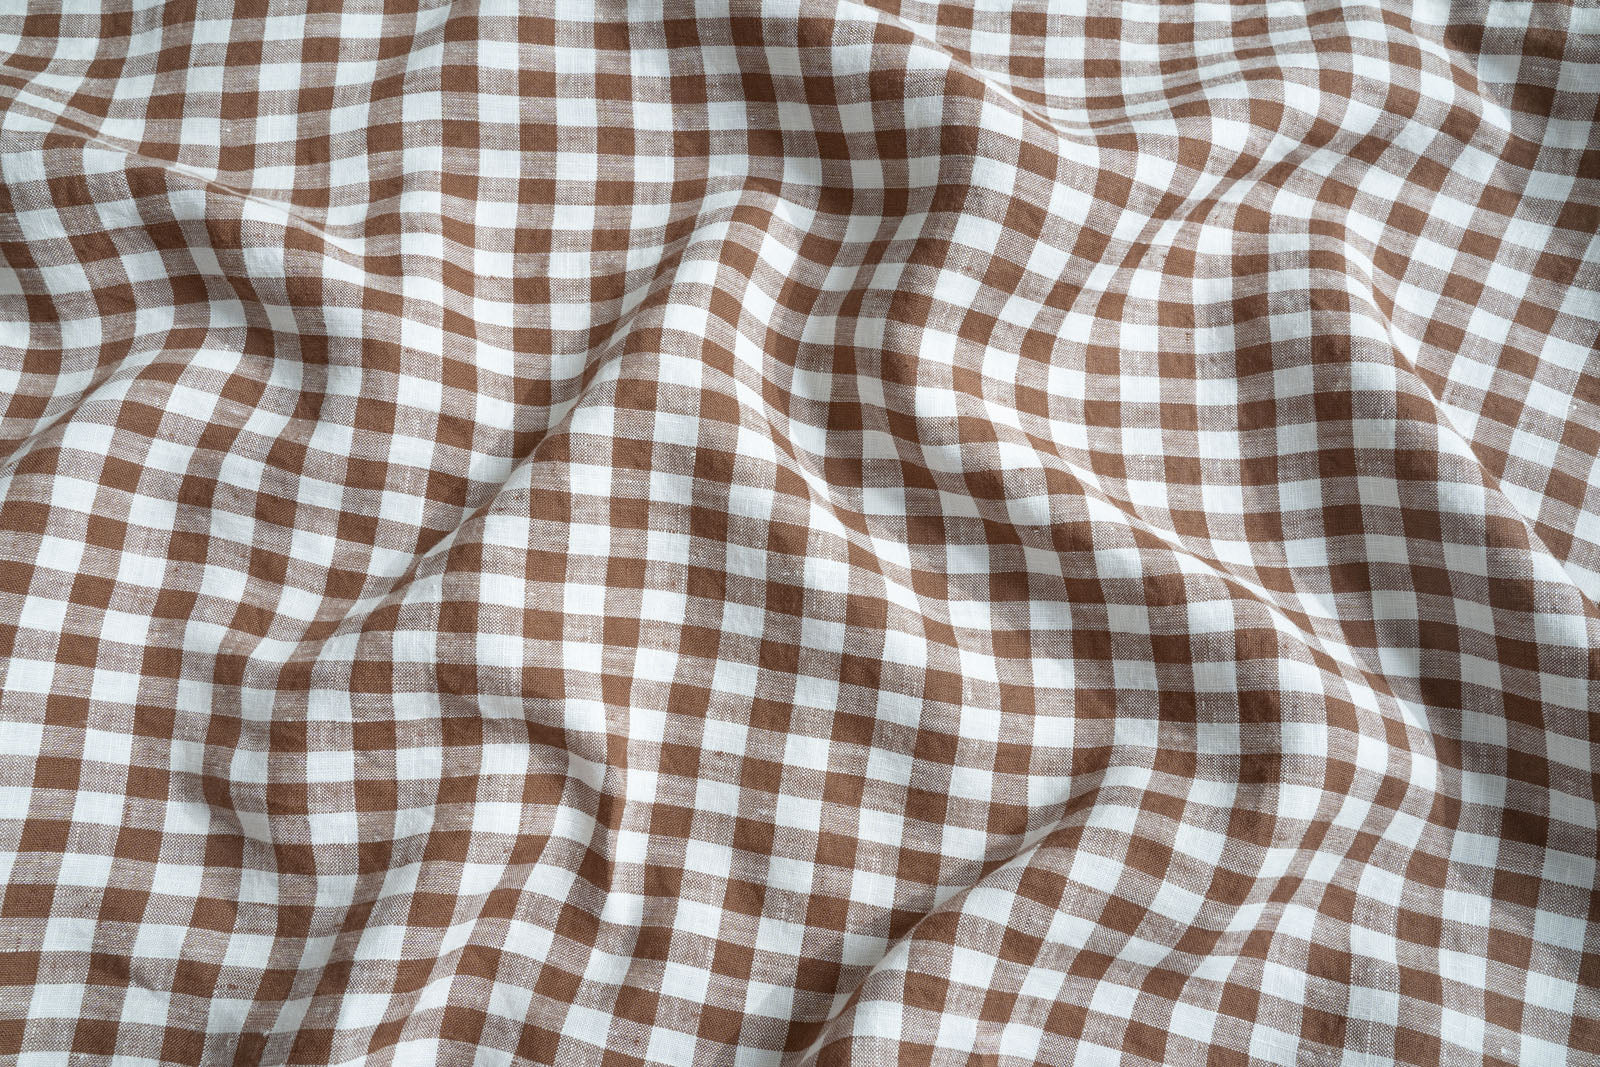 Cocoa Gingham French Flax Linen